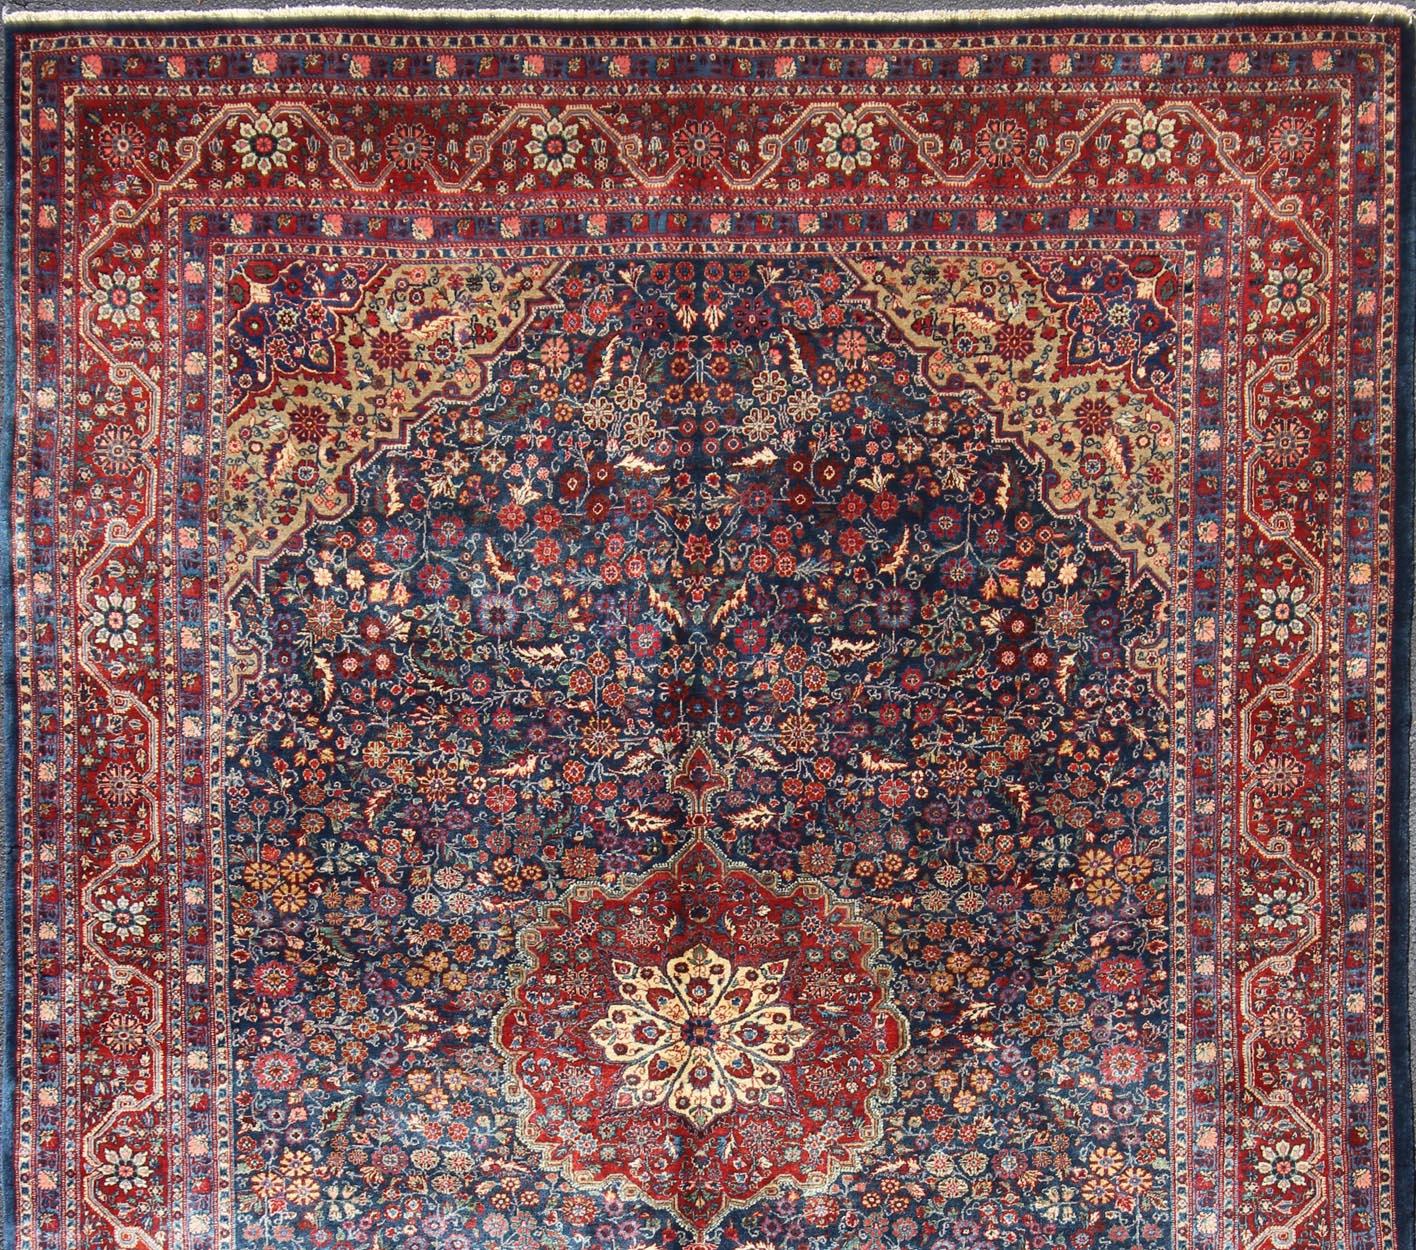 Blossoming antique Persian Josan rug with all-over Arabesque design in blue, rug EB-CON-10001, country of origin / type: Iran / Josan, circa. 1900

Distinct colors that are similar yet starkly rendered flow alongside each other in this gorgeous